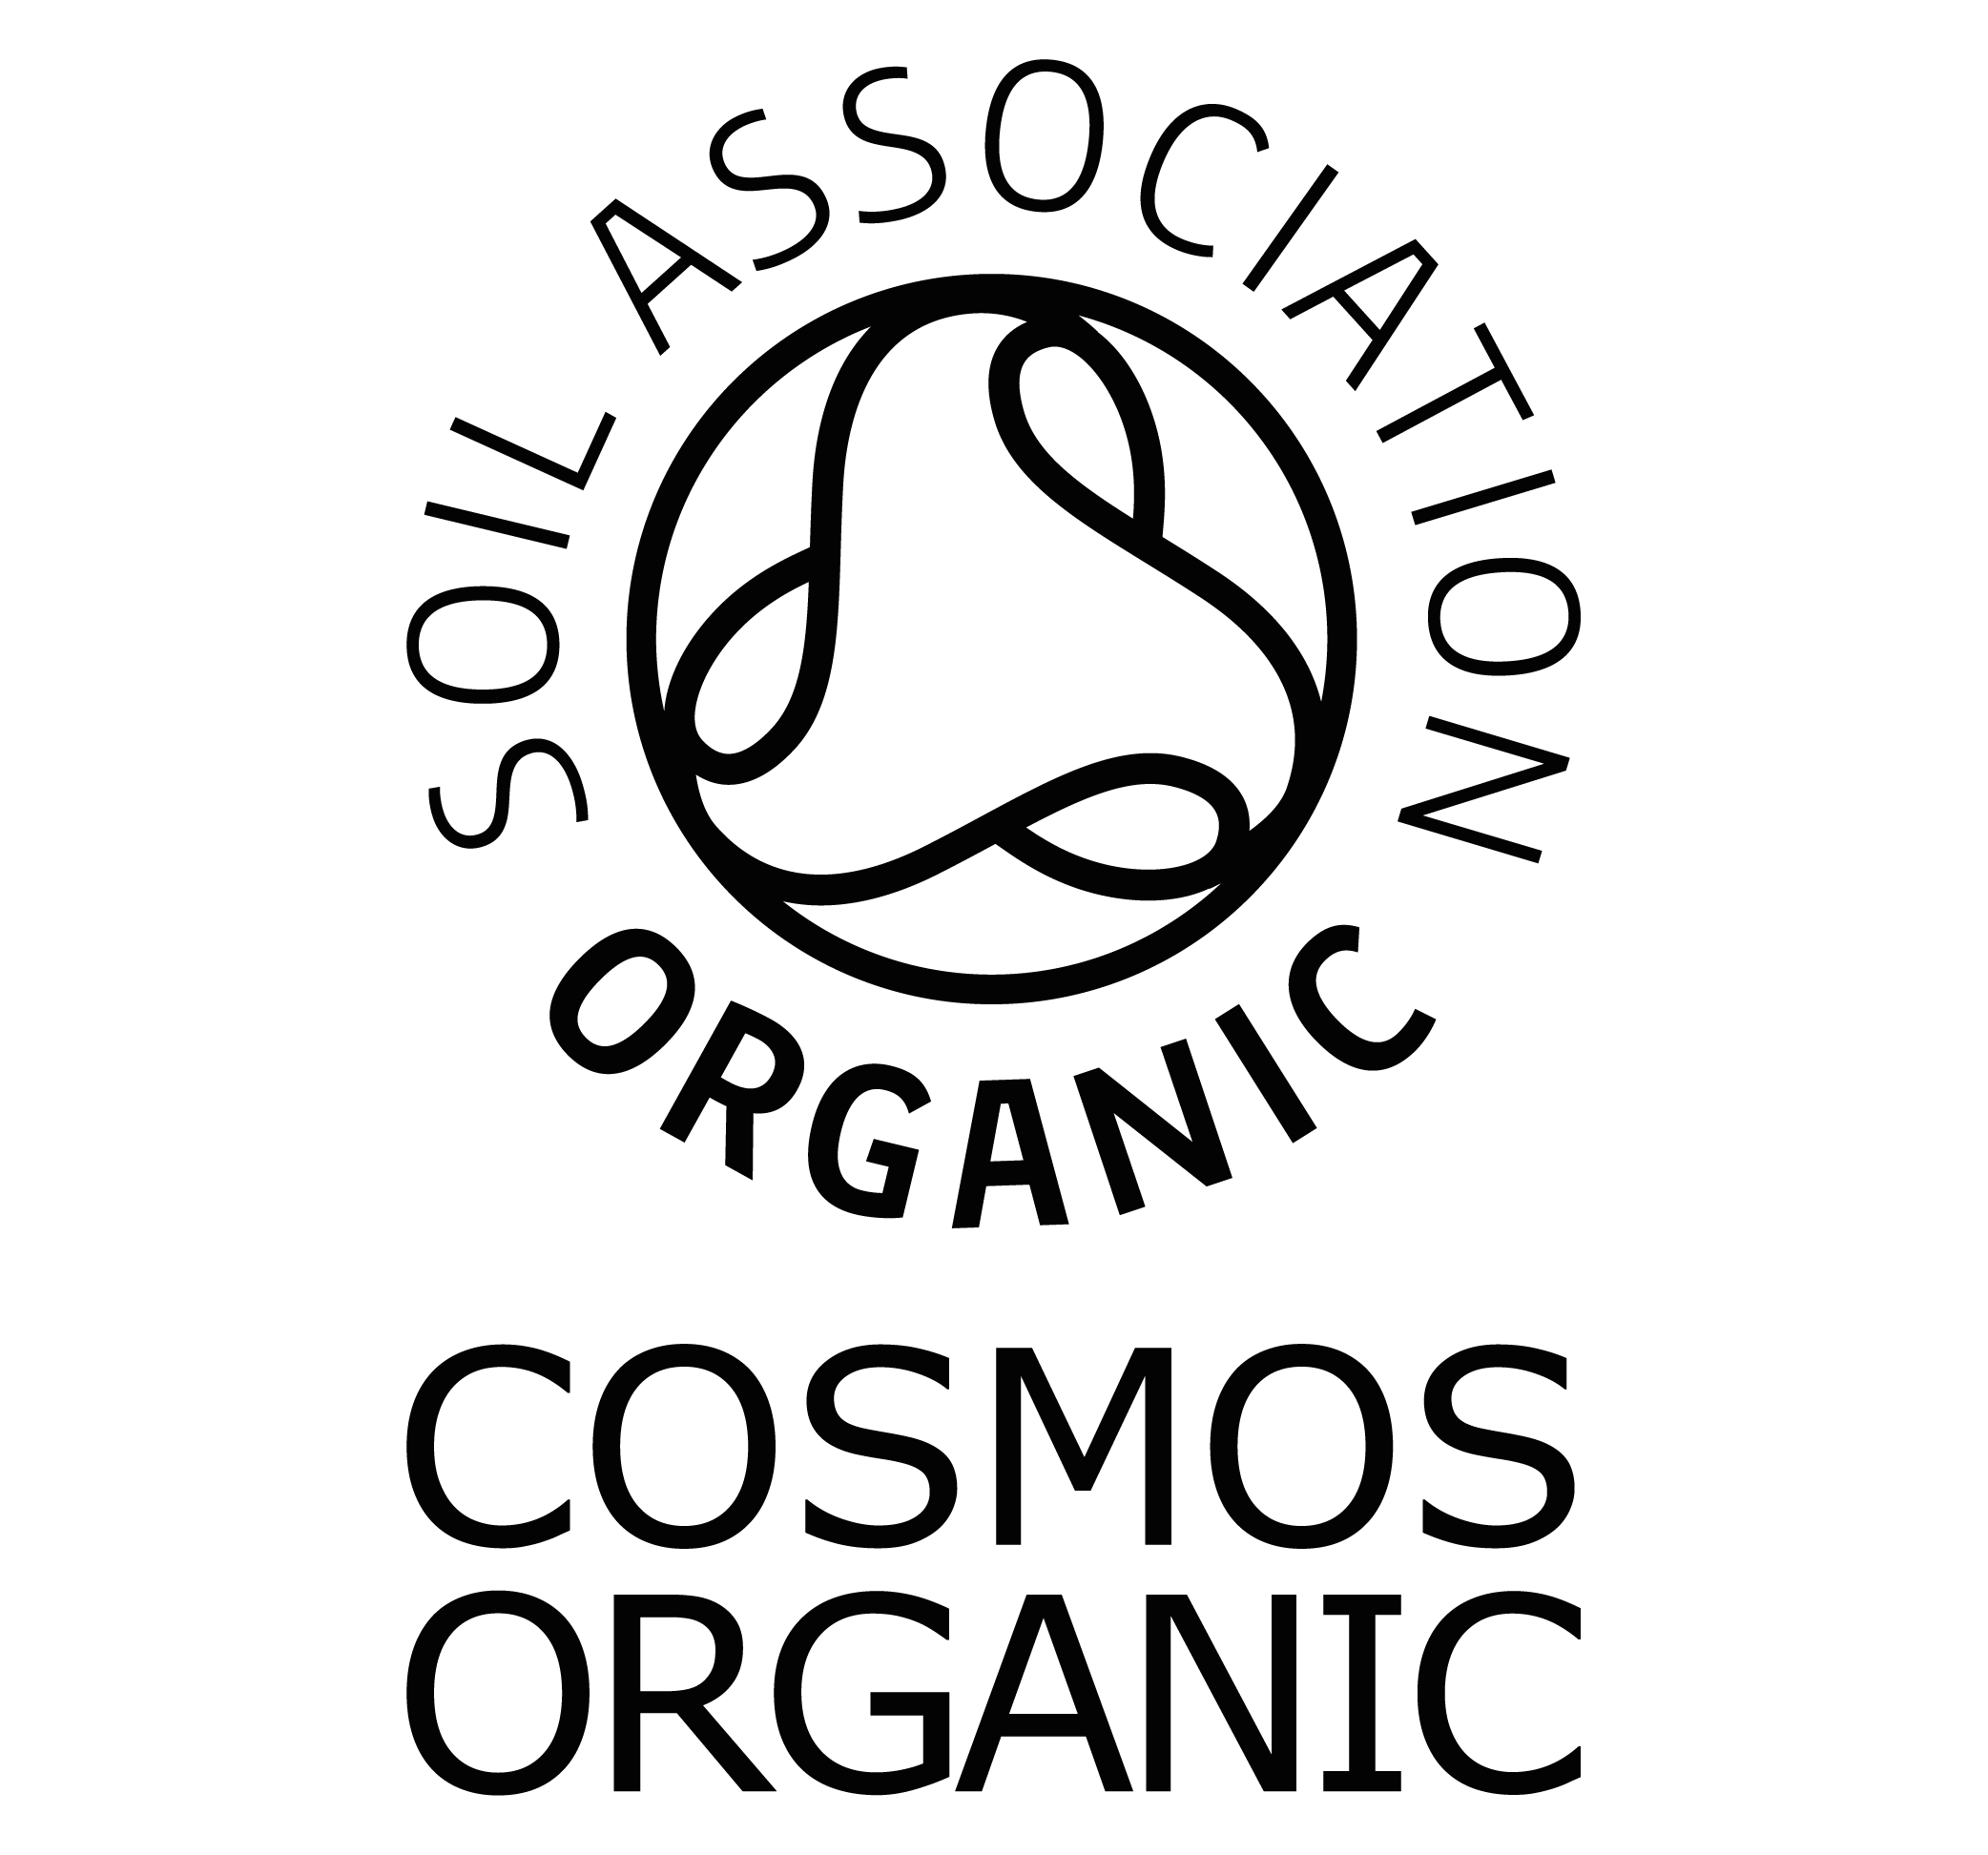 Certified organic with Soil Association COSMOS